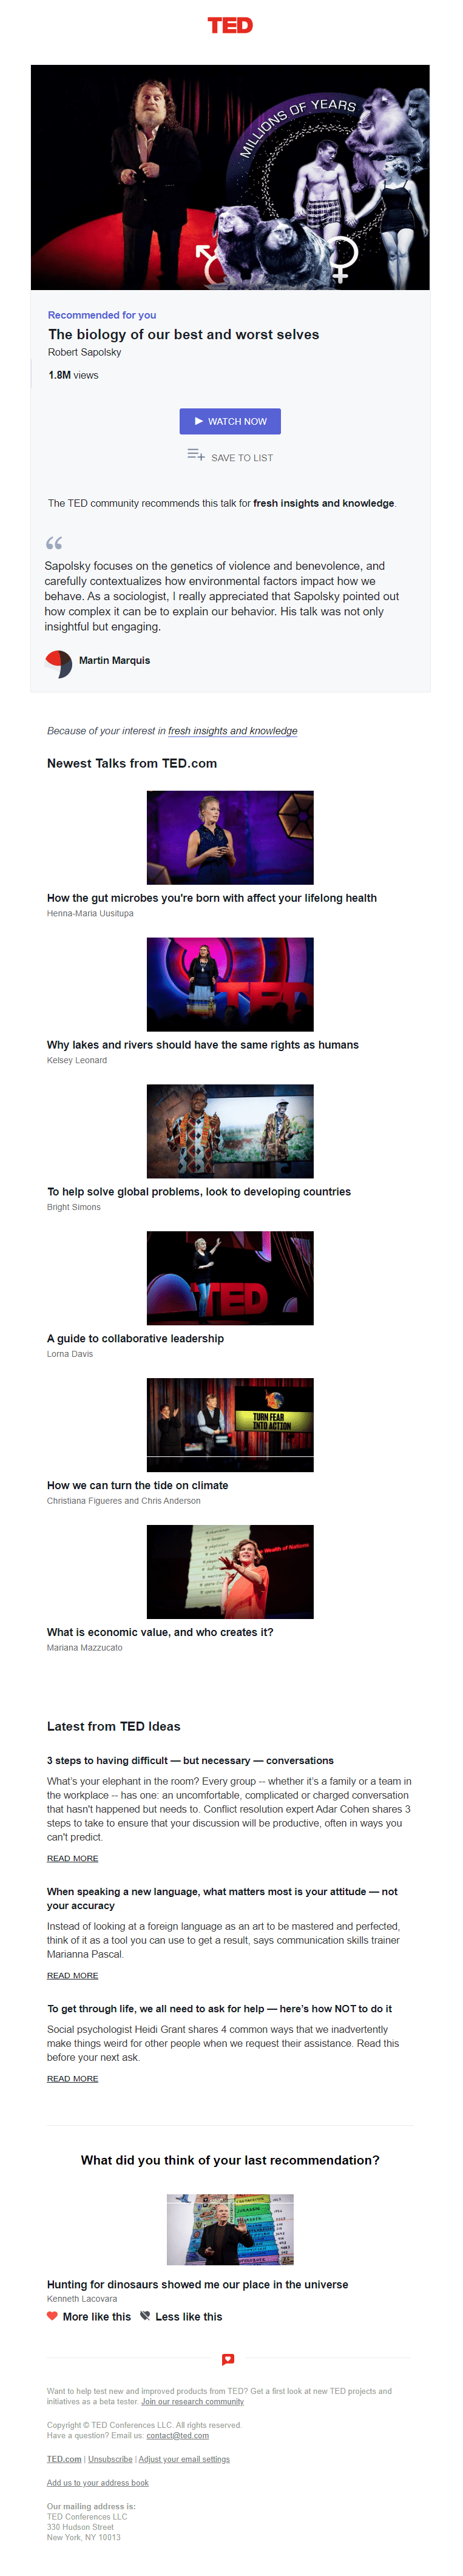 Personalized recommendations from TED